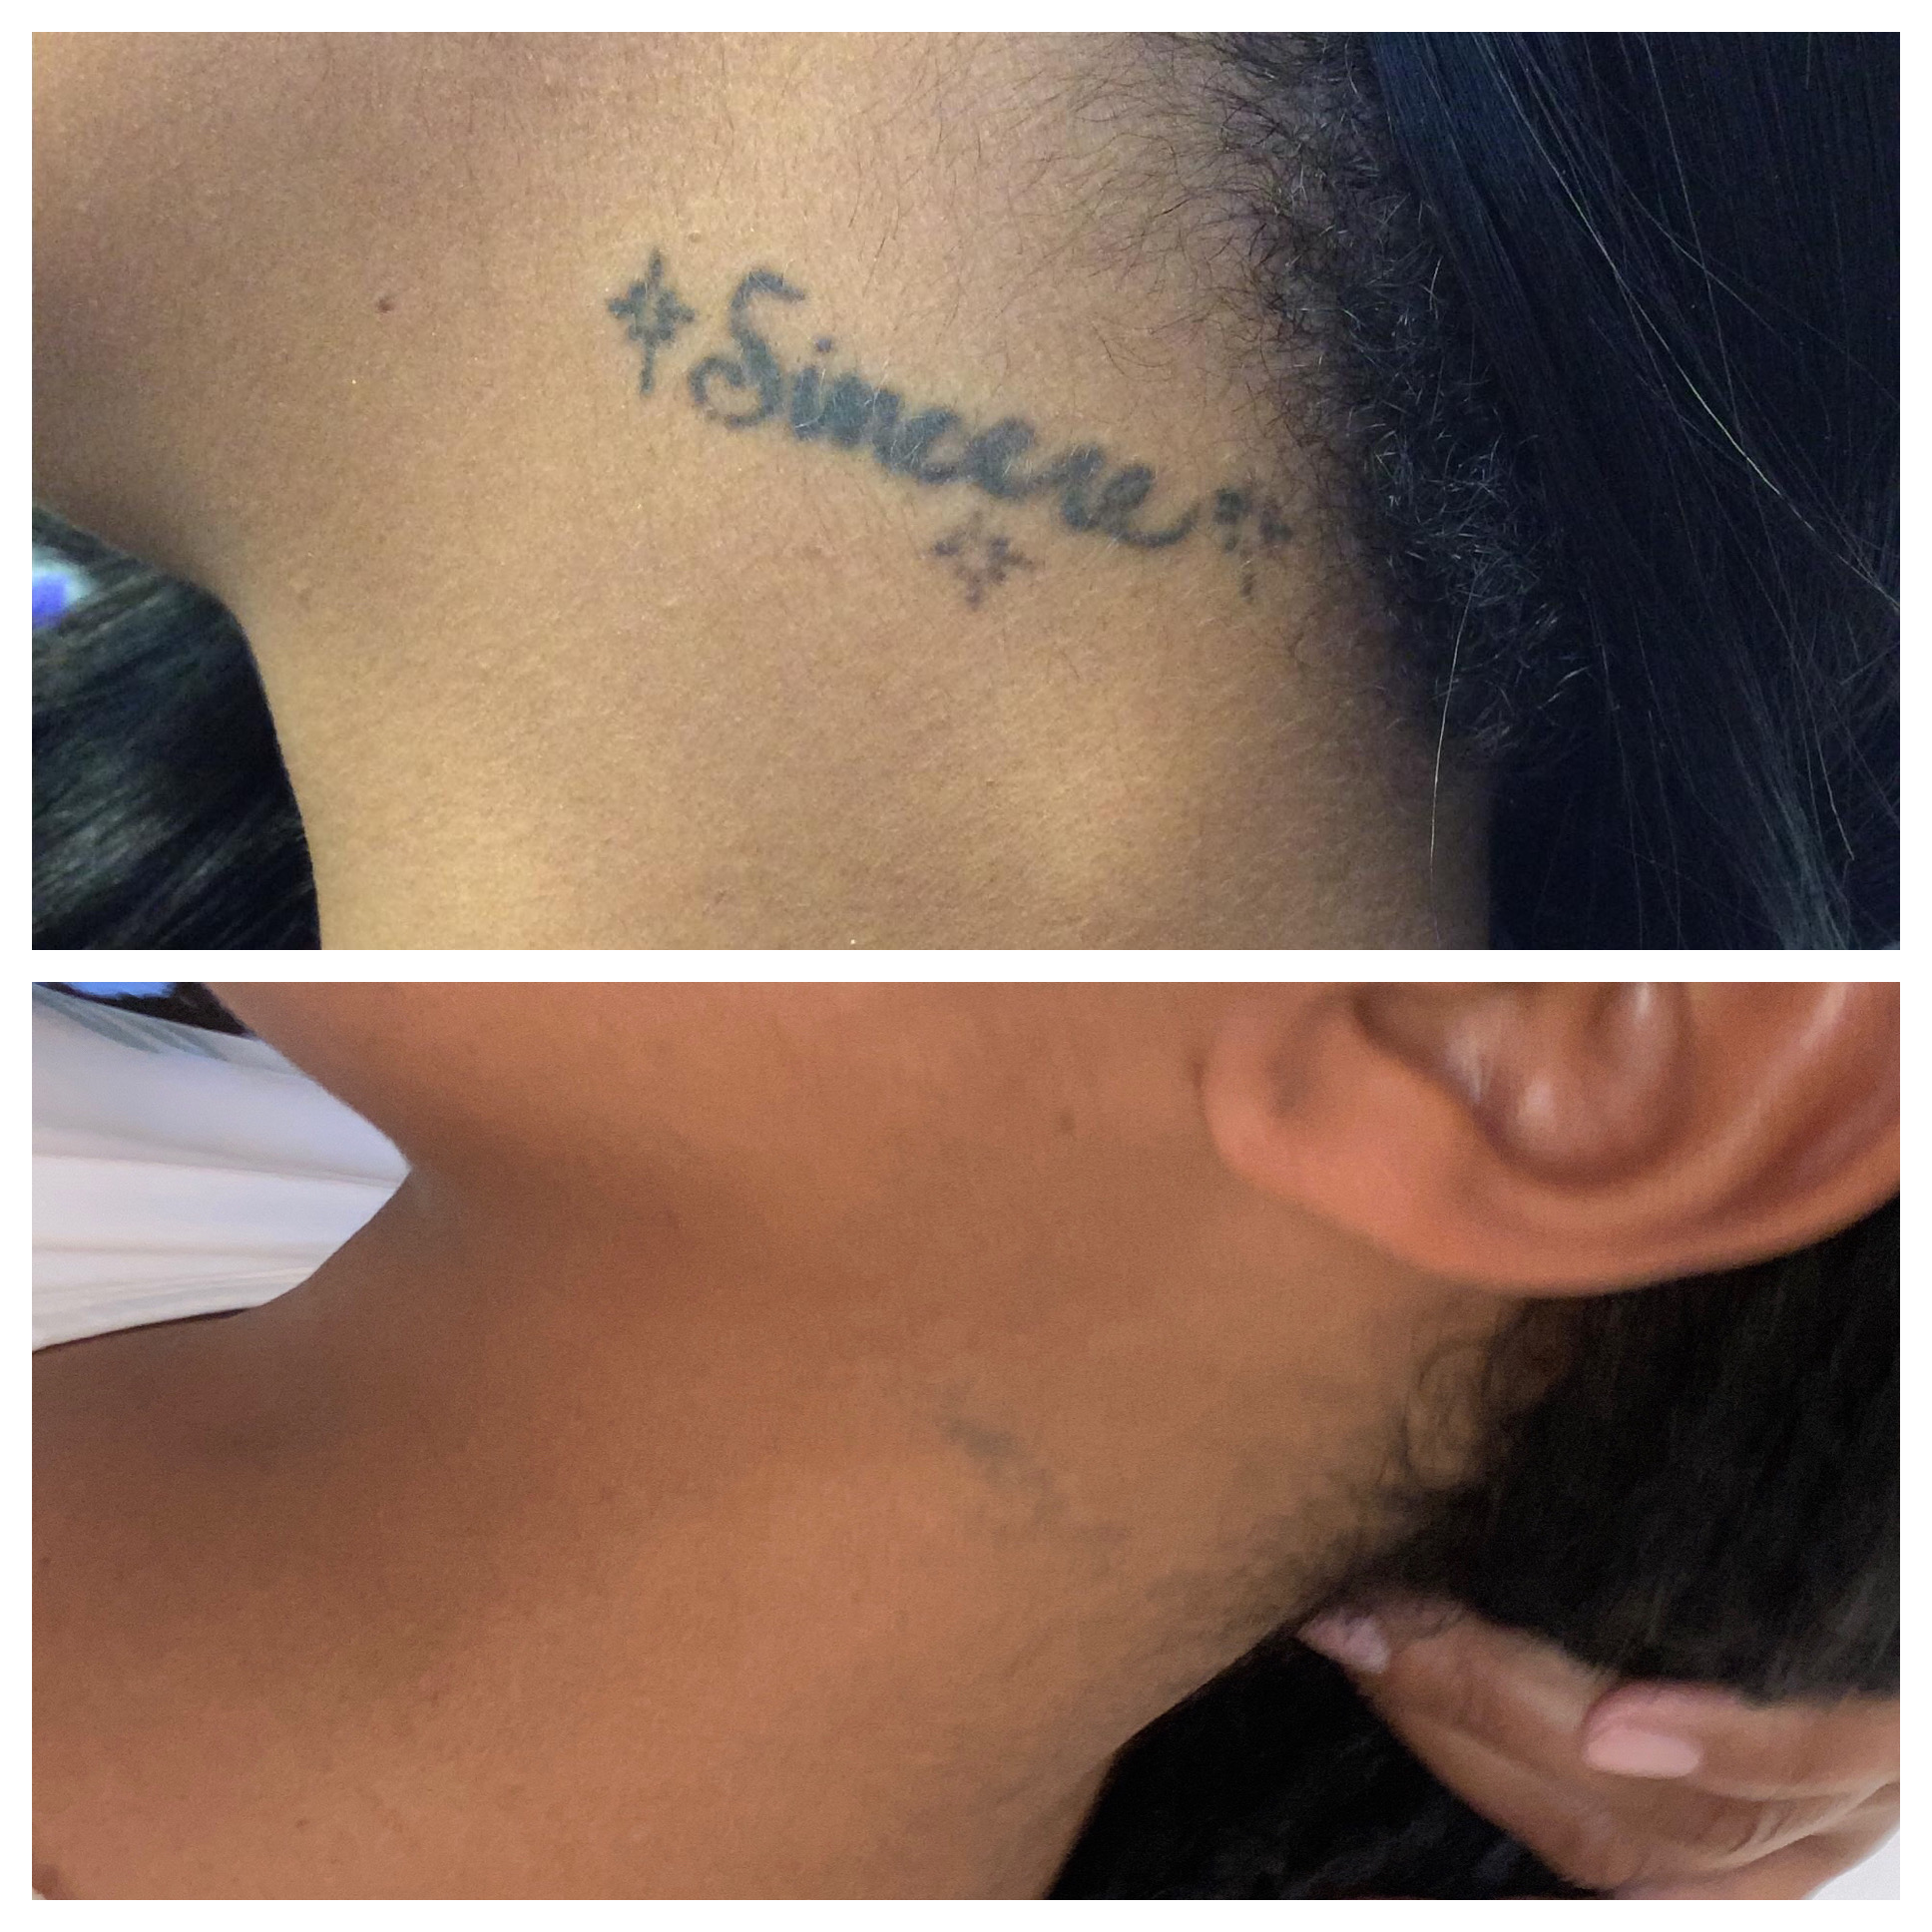 Before and after top and bottom of tattoo removal of word 